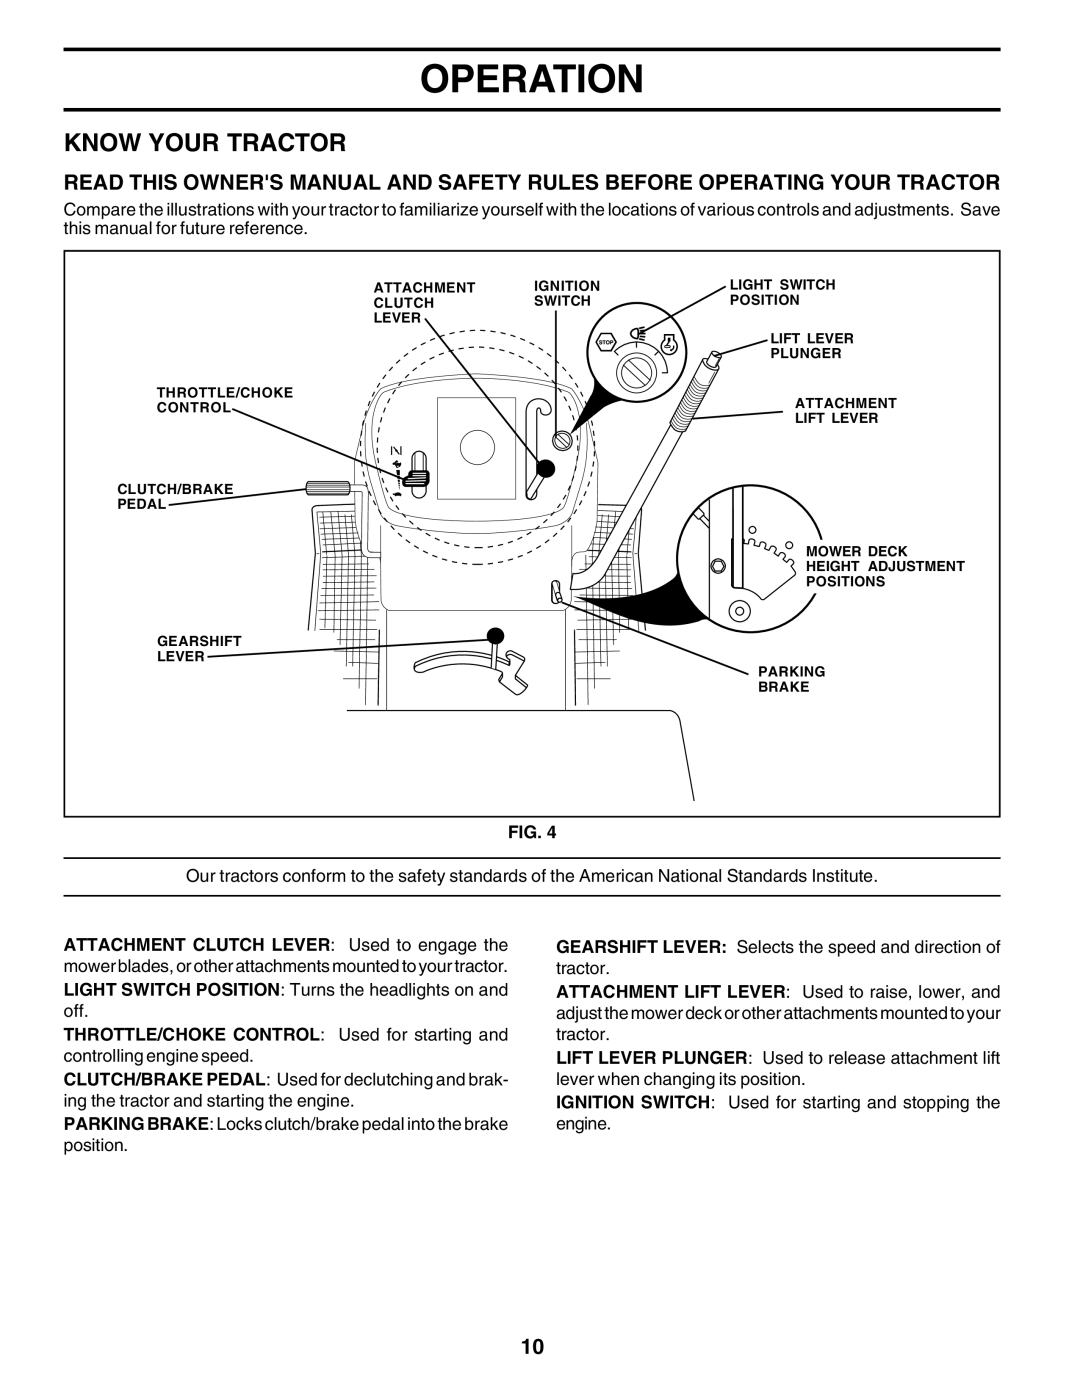 Weed Eater WE1538B manual Know Your Tractor, Operation 